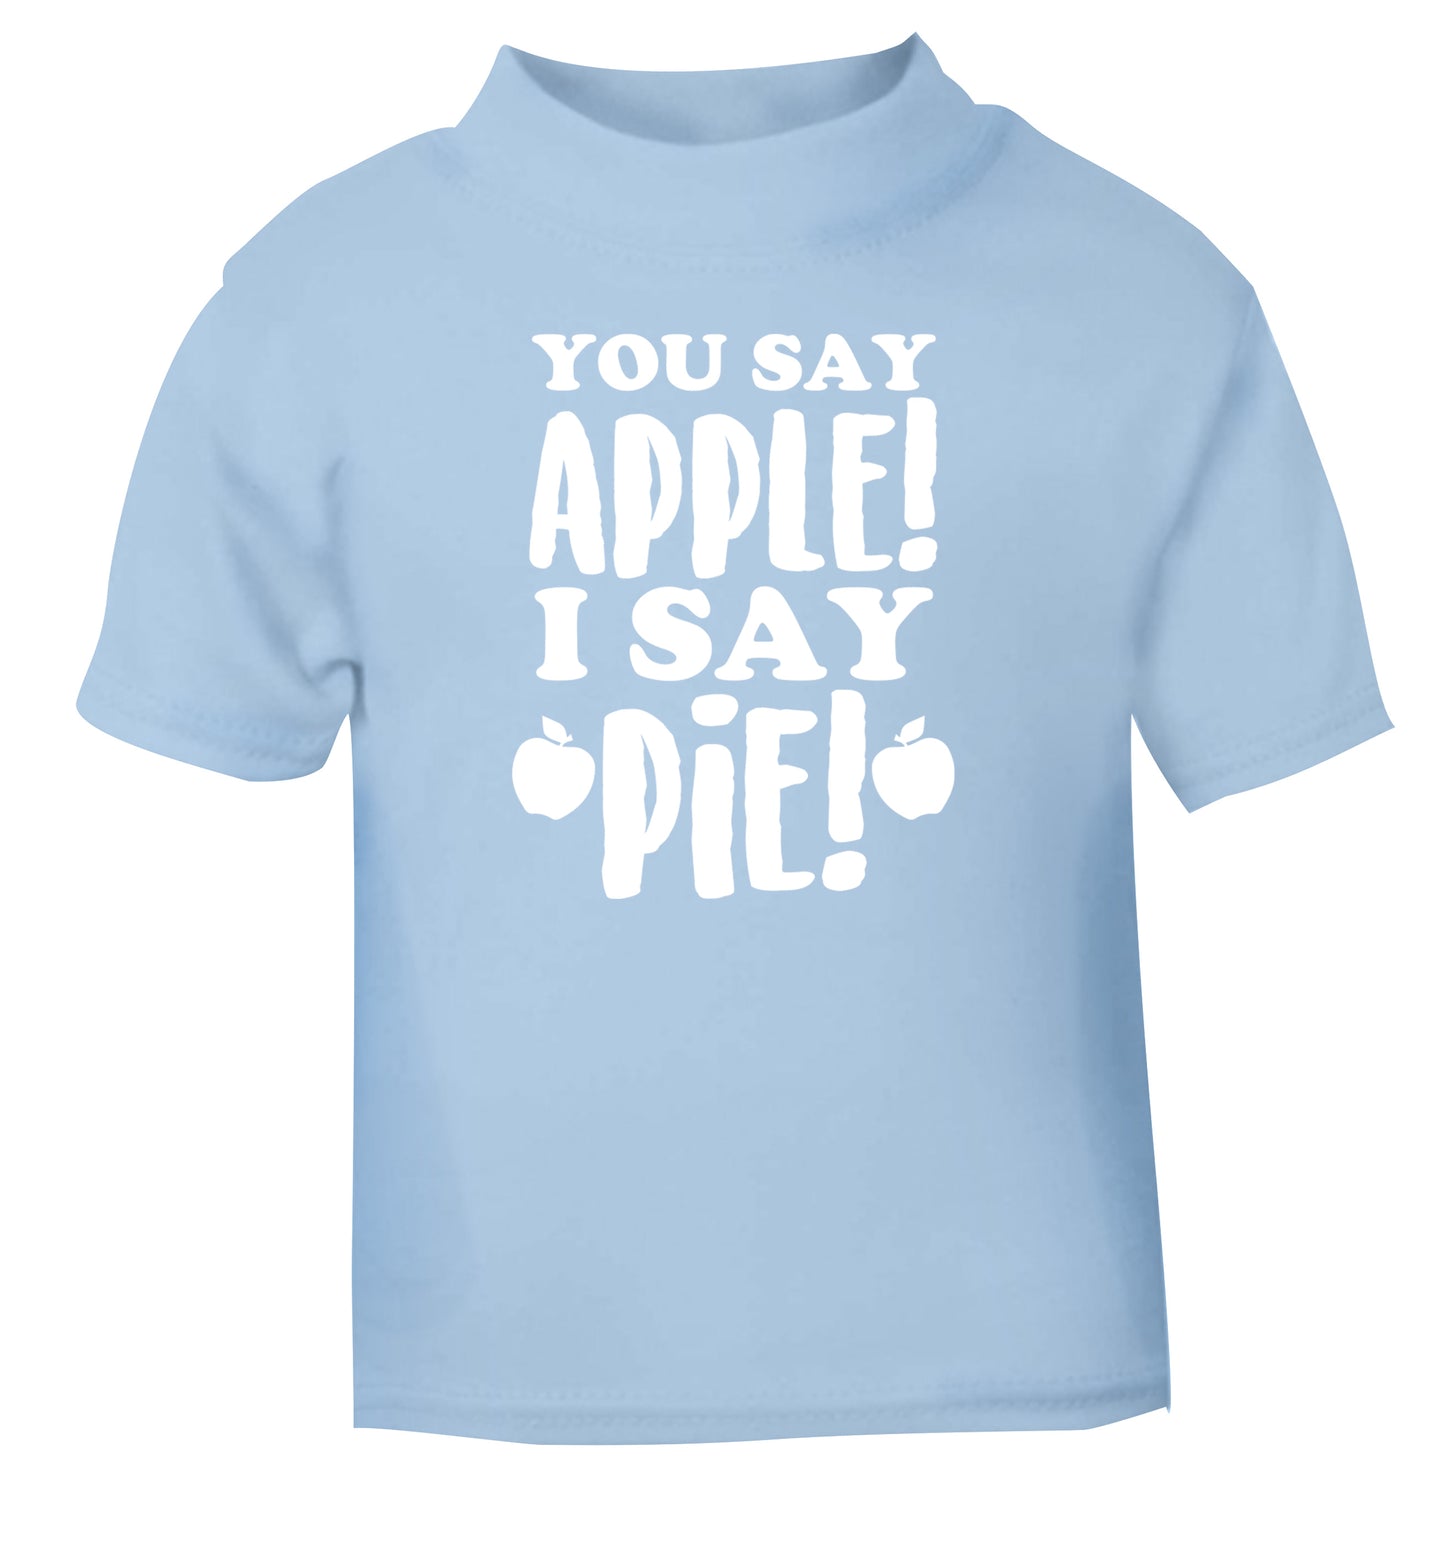 You say apple I say pie! light blue Baby Toddler Tshirt 2 Years